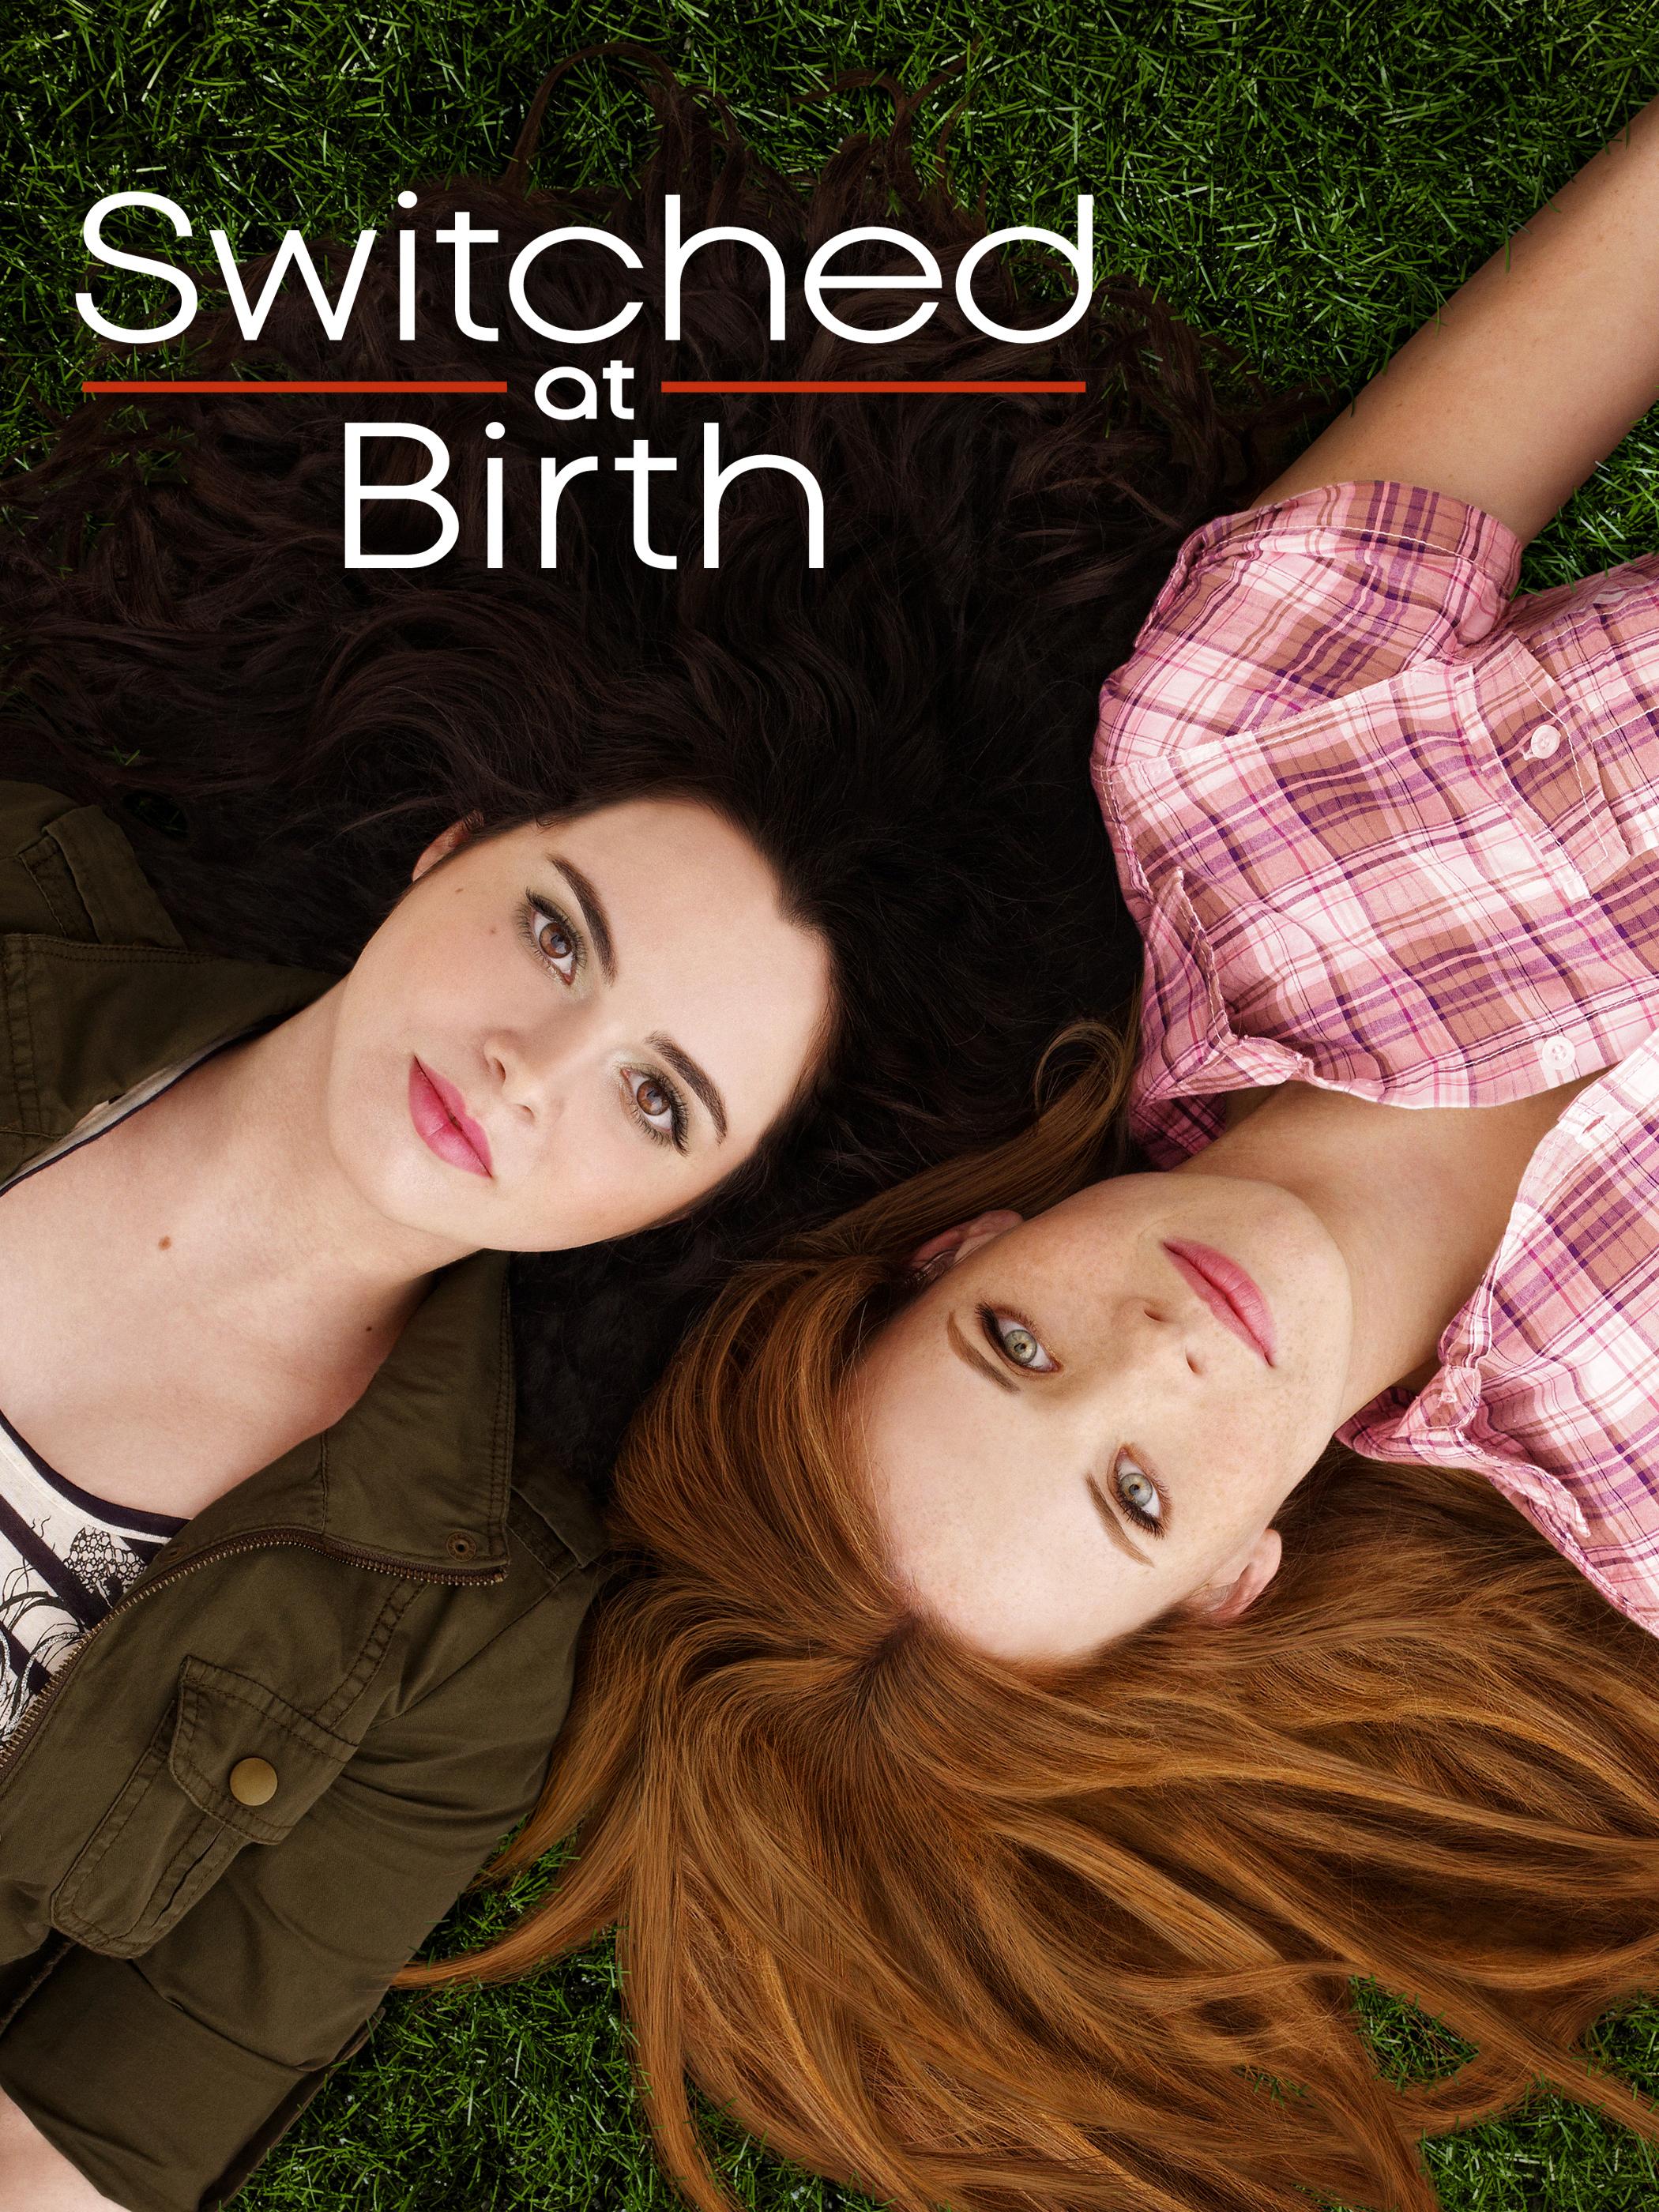 where can i watch switched at birth